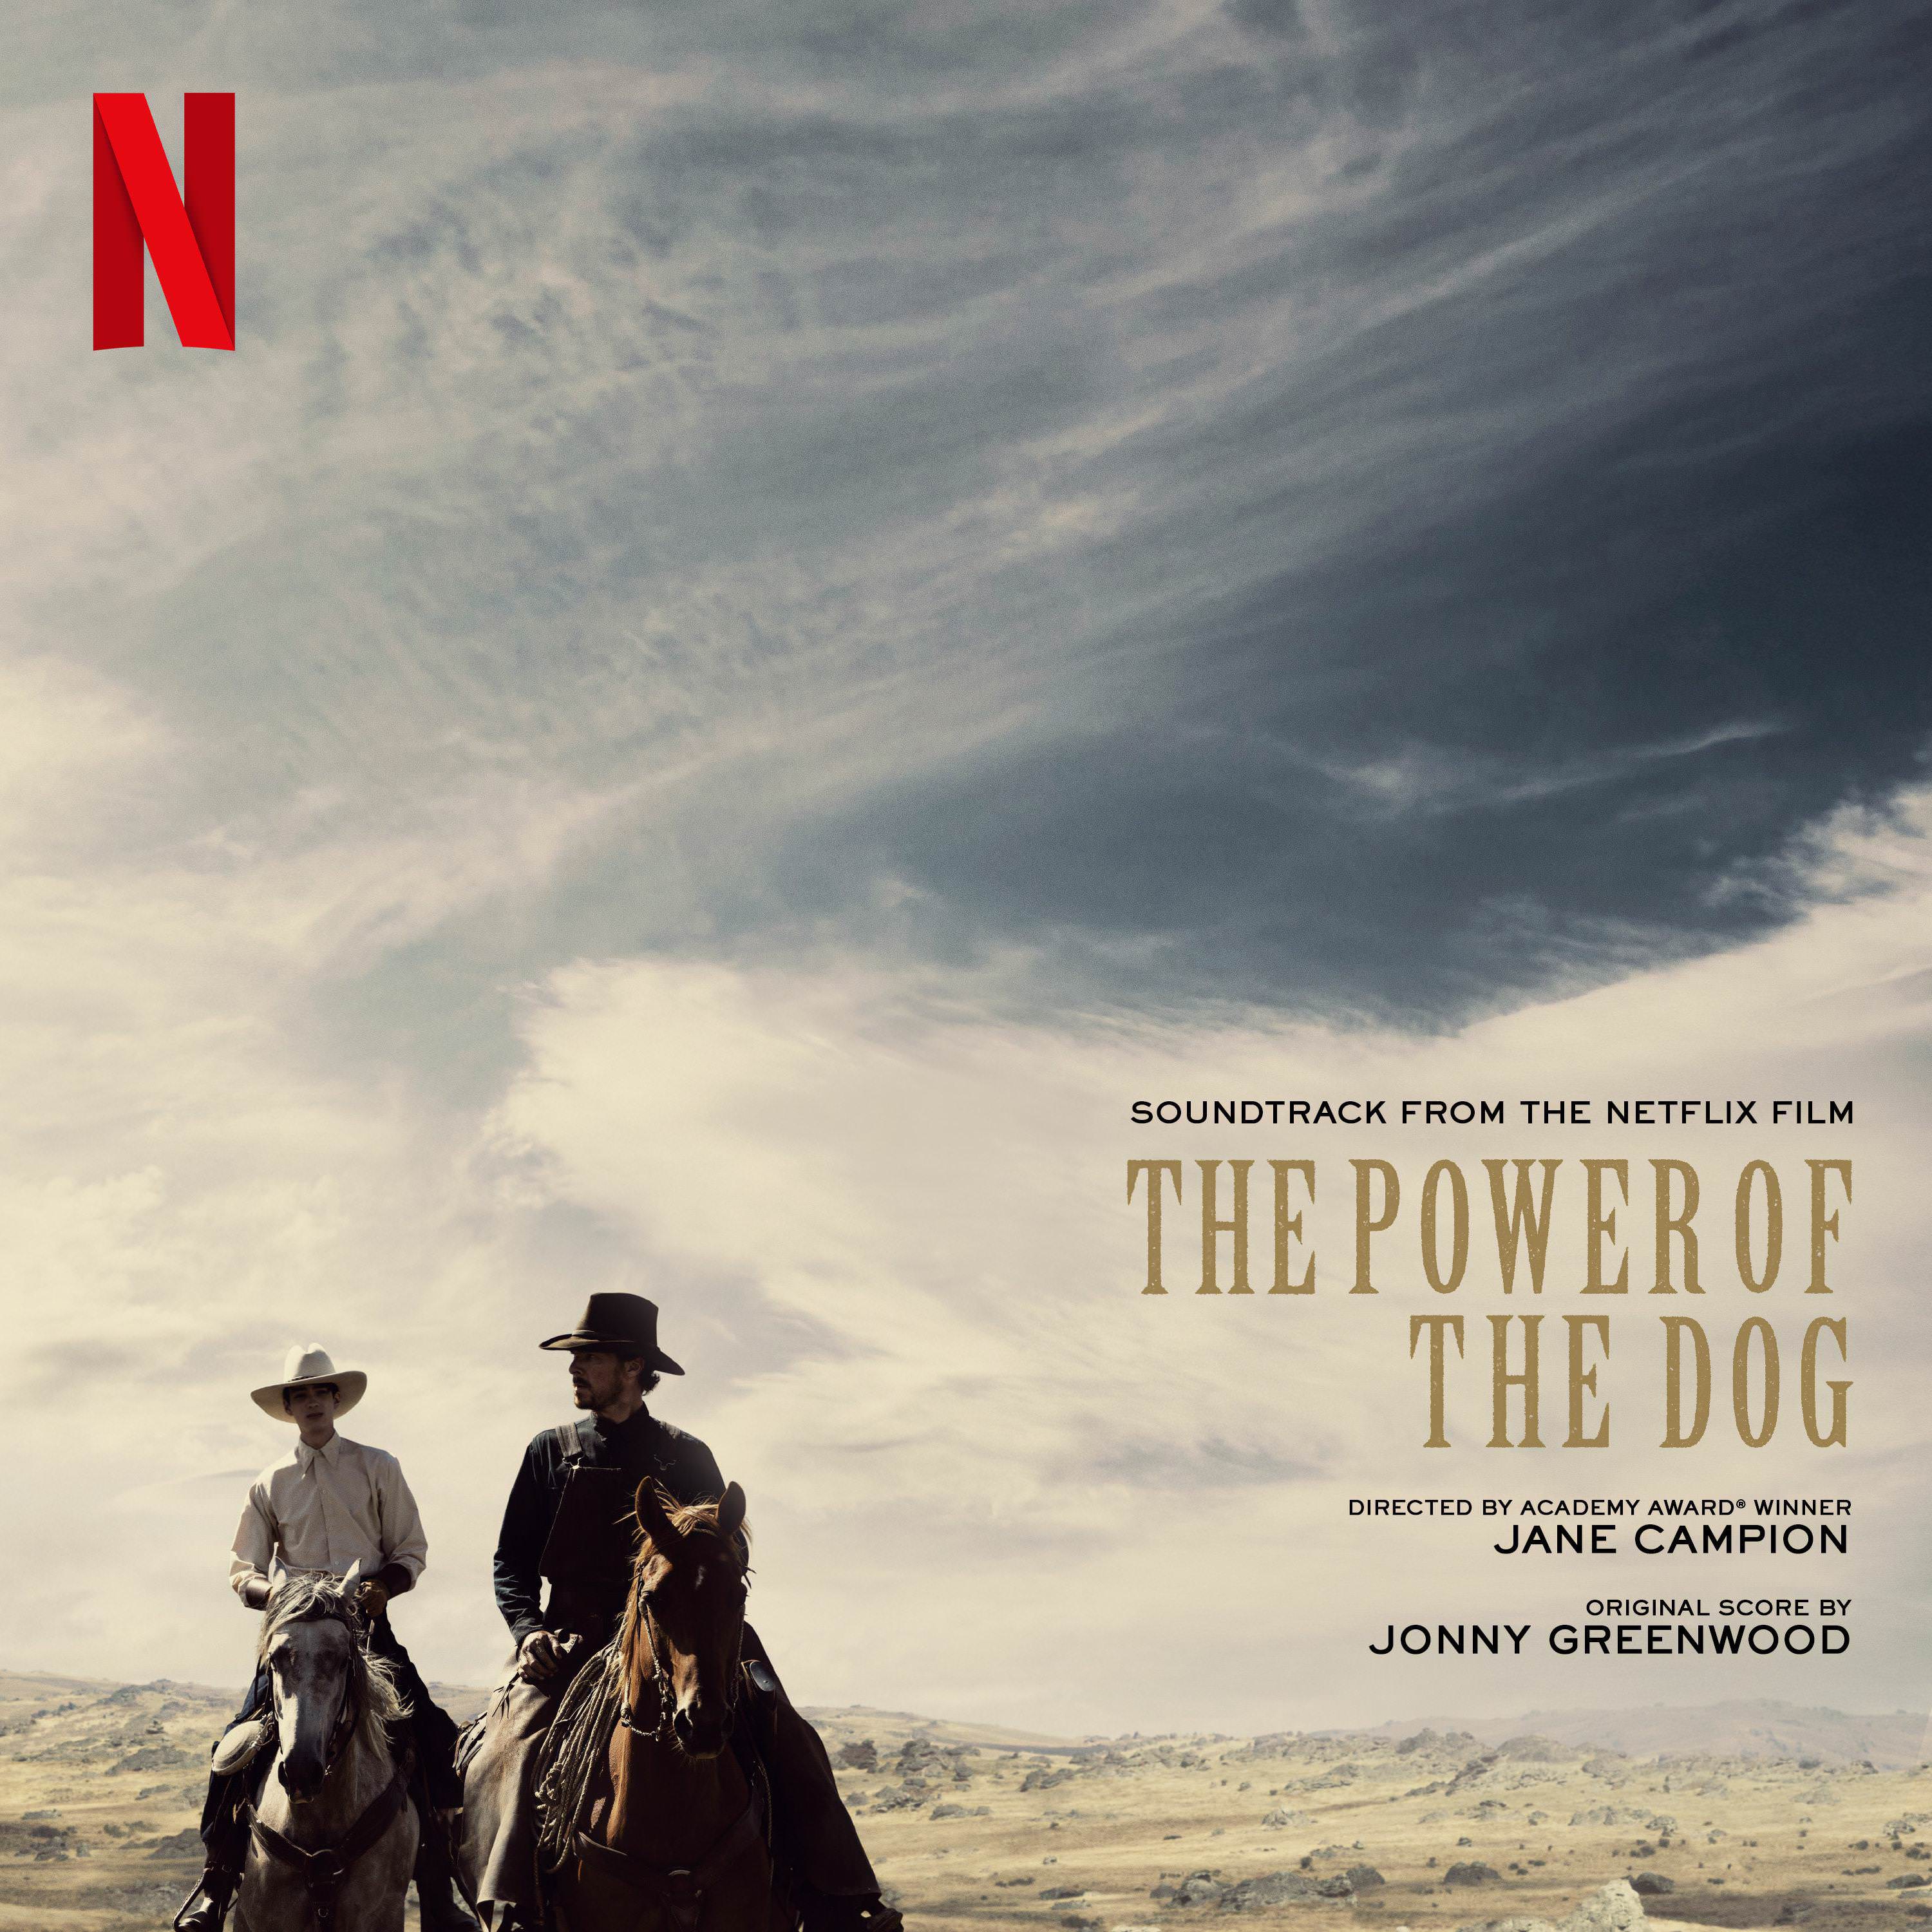 The Power of the Dog (Soundtrack From the Netflix Film), Jonny Greenwood